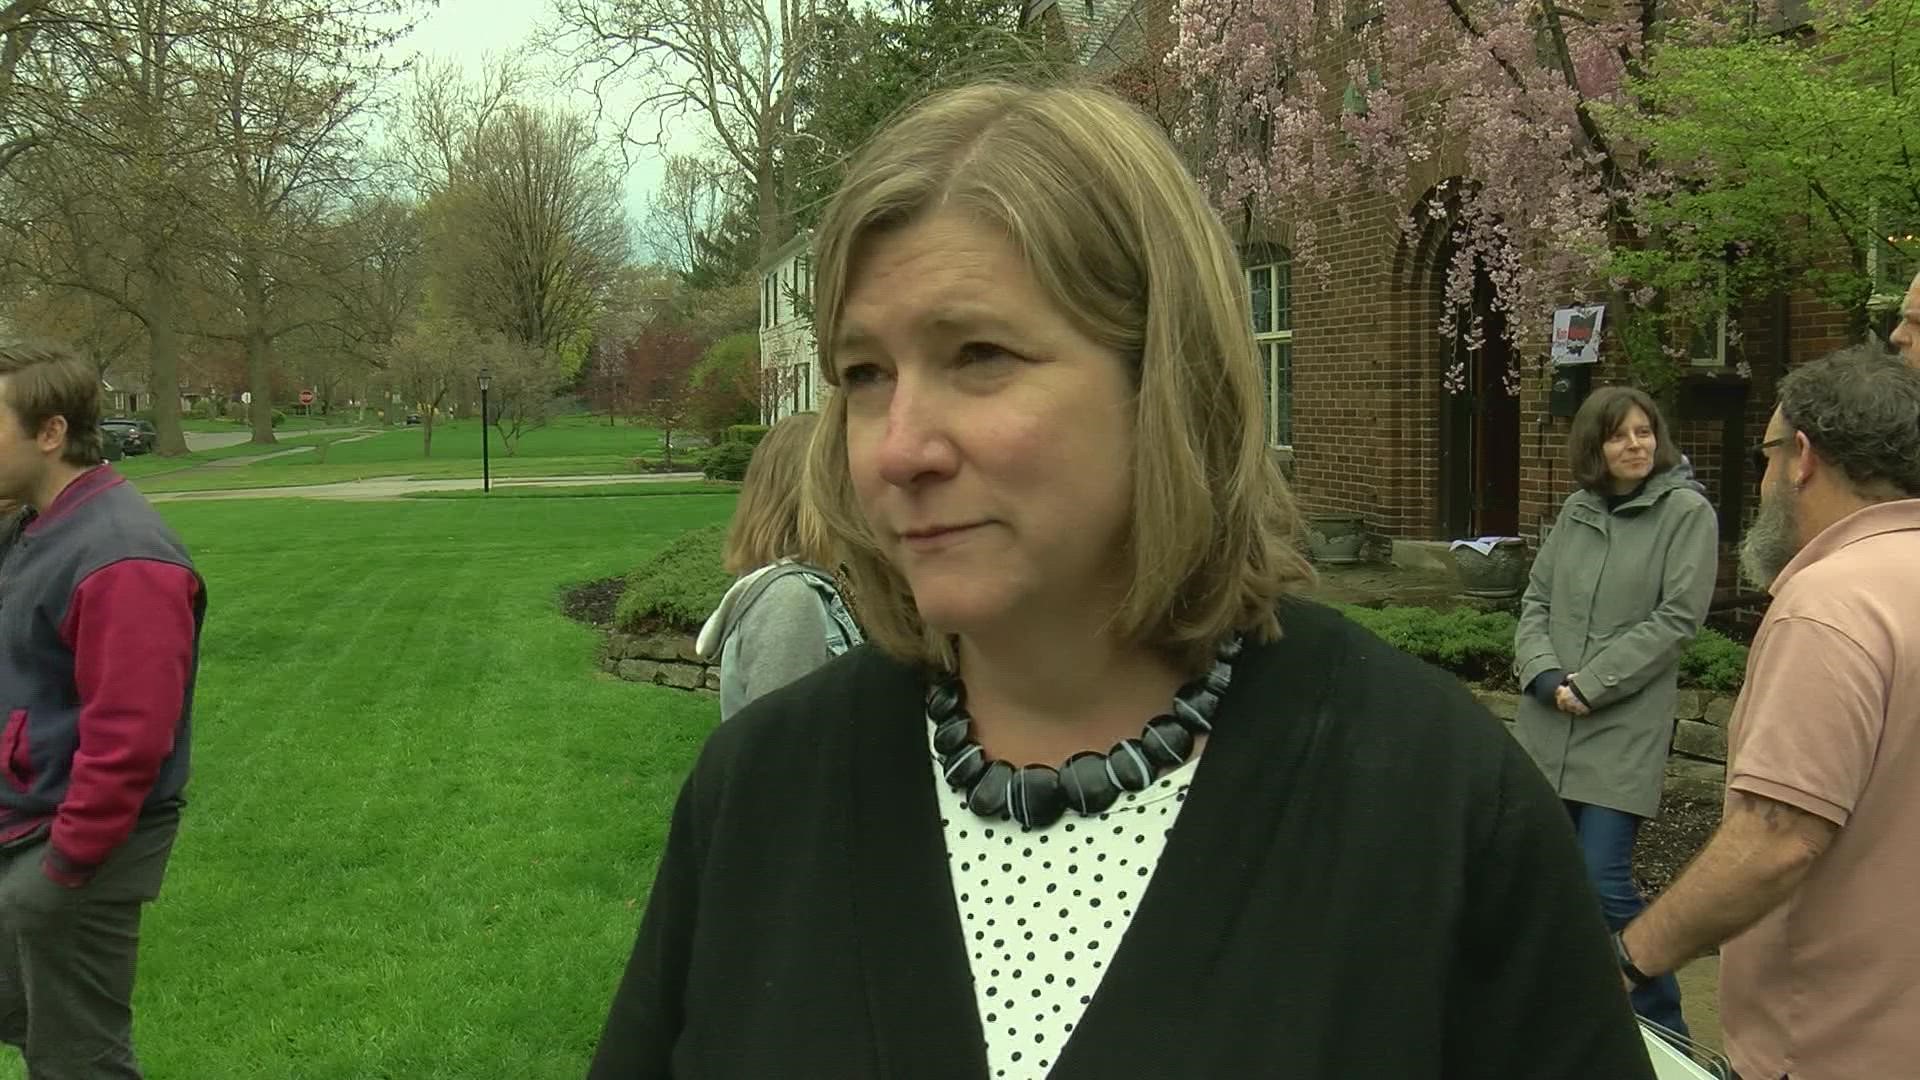 Democratic candidate for Governor Nan Whaley made a stop at Mayor Wade Kapszukiewicz's home in Toledo on Saturday ahead of Tuesday's primary election.